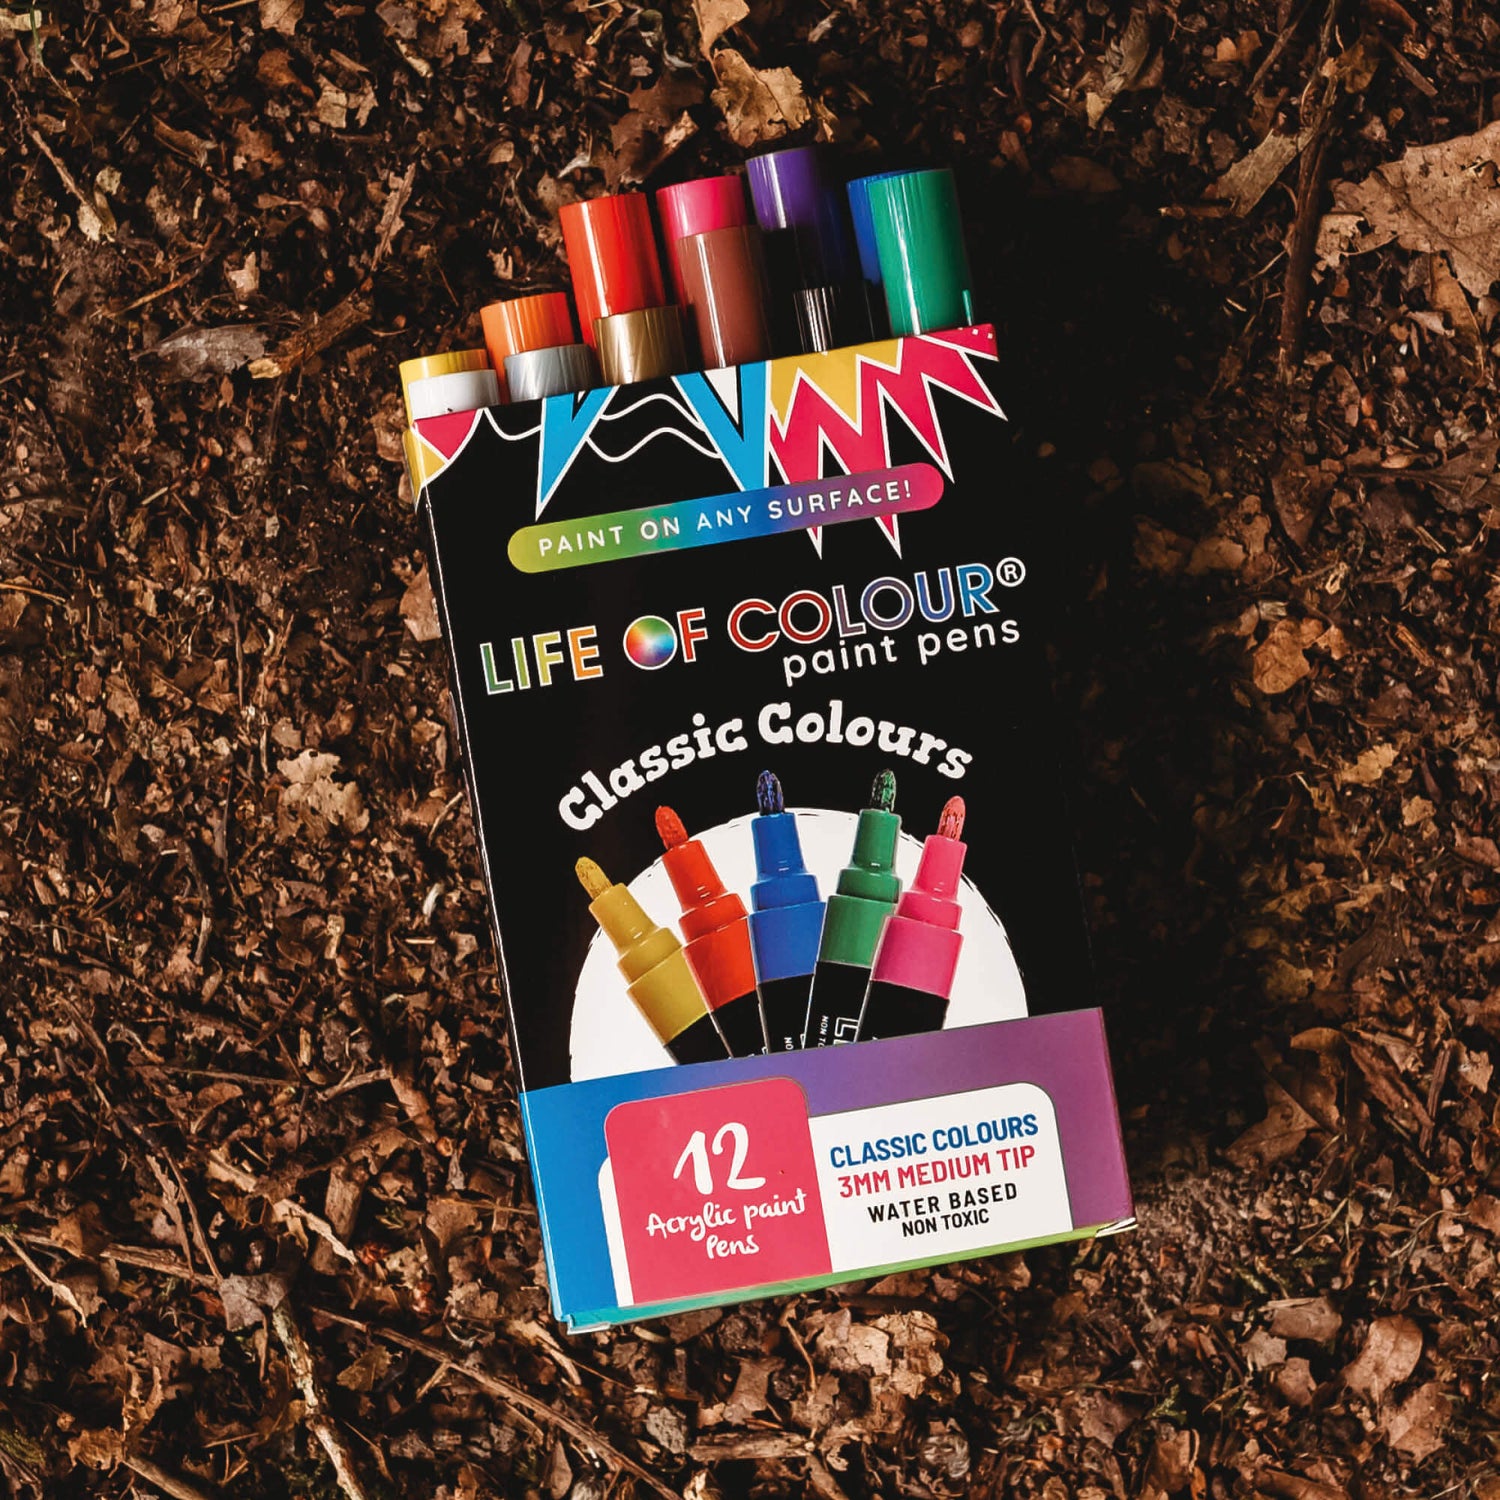 Classic colours medium tip paint pens from Life of Colour in Your Wild Books shop